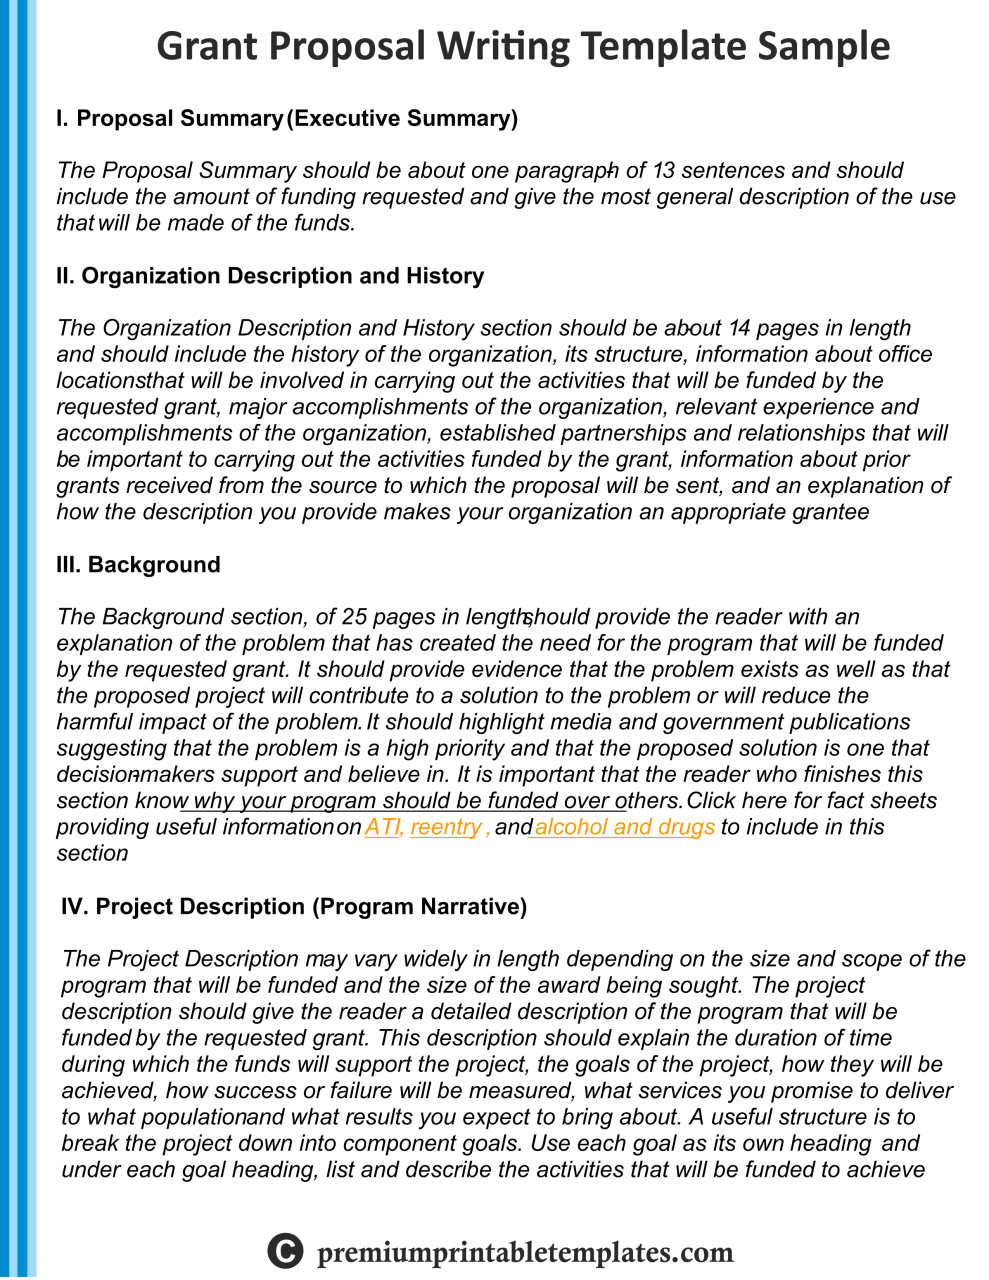 Grant Writing Proposal Sample [Pack of 5] Proposal writing, Grant